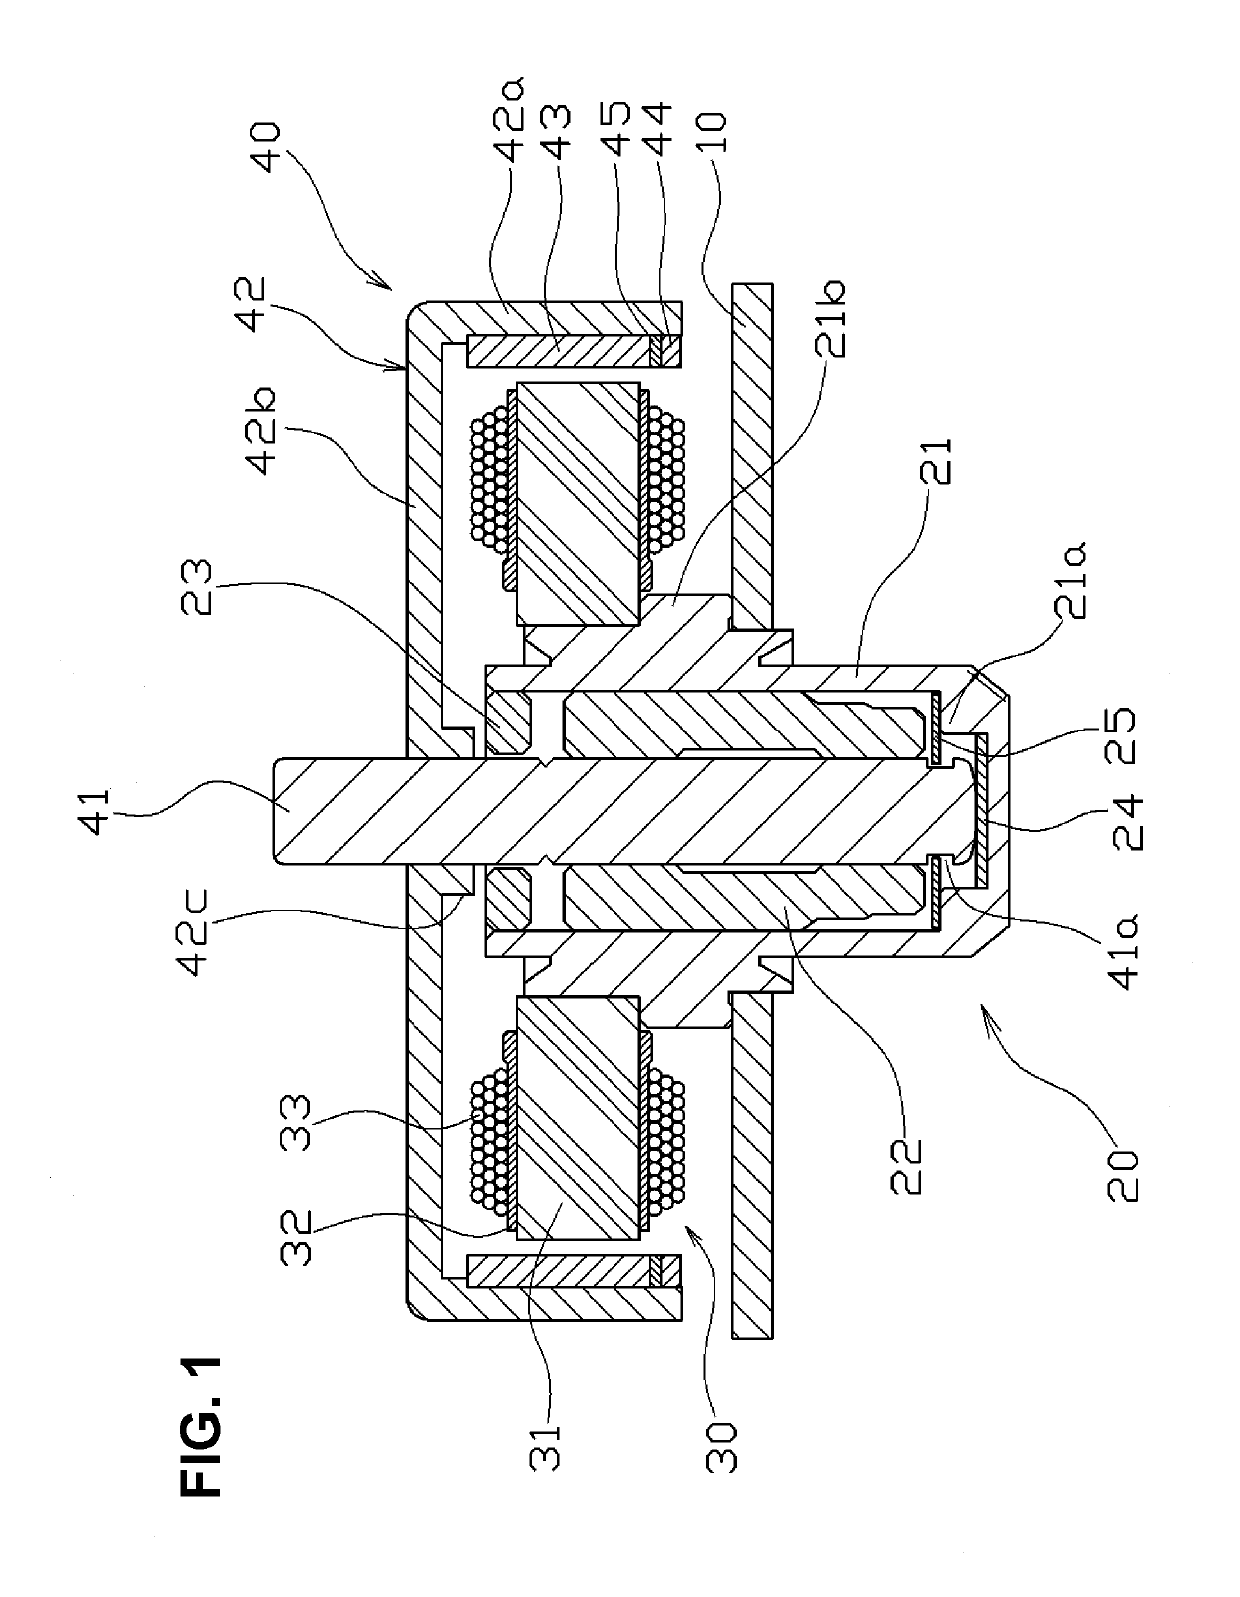 Brushless motor having an outer rotor and an annular separation plate between the drive magnet and the position detection magnet